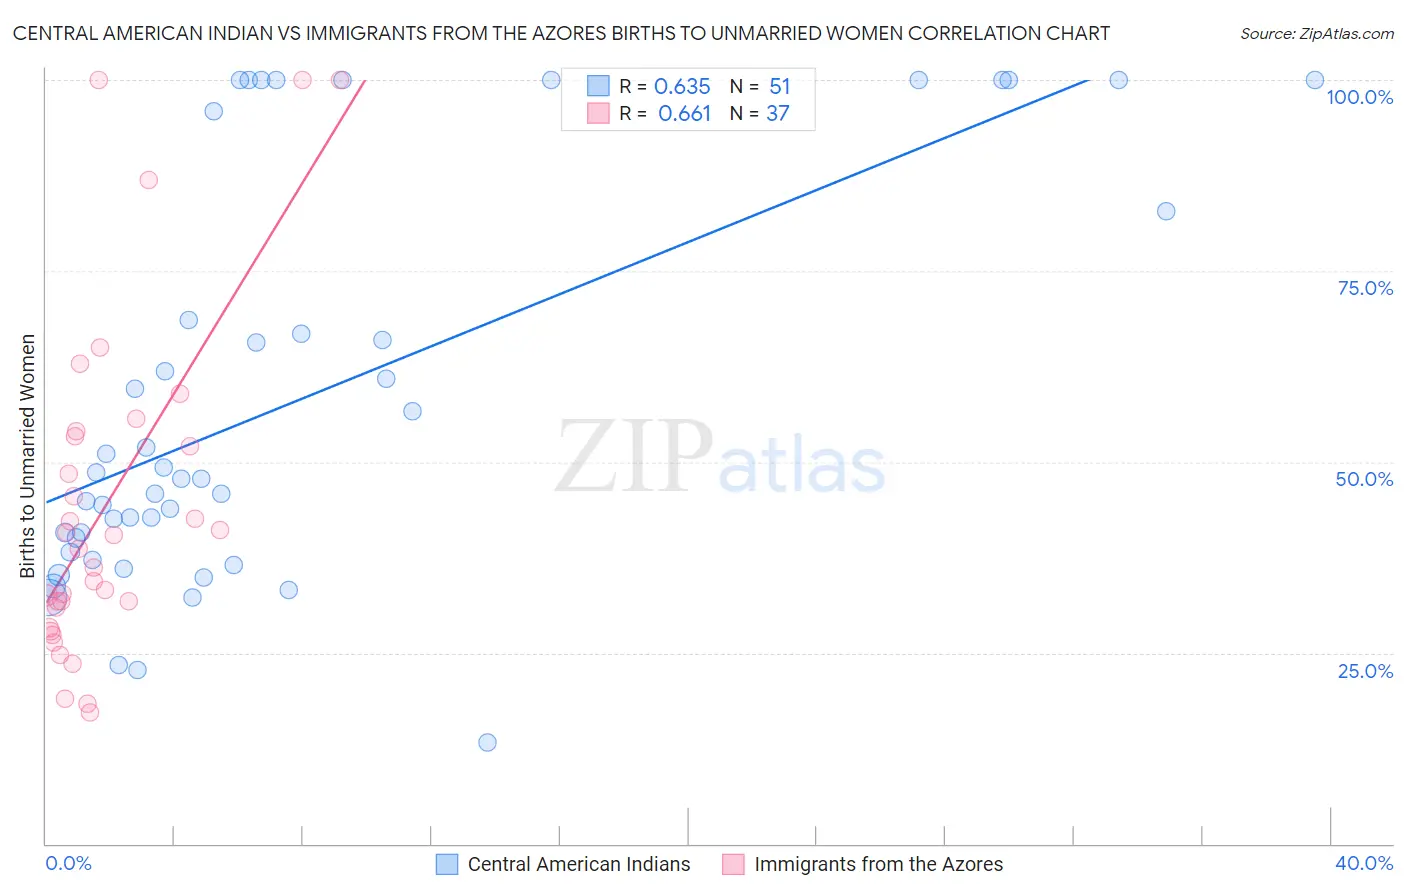 Central American Indian vs Immigrants from the Azores Births to Unmarried Women